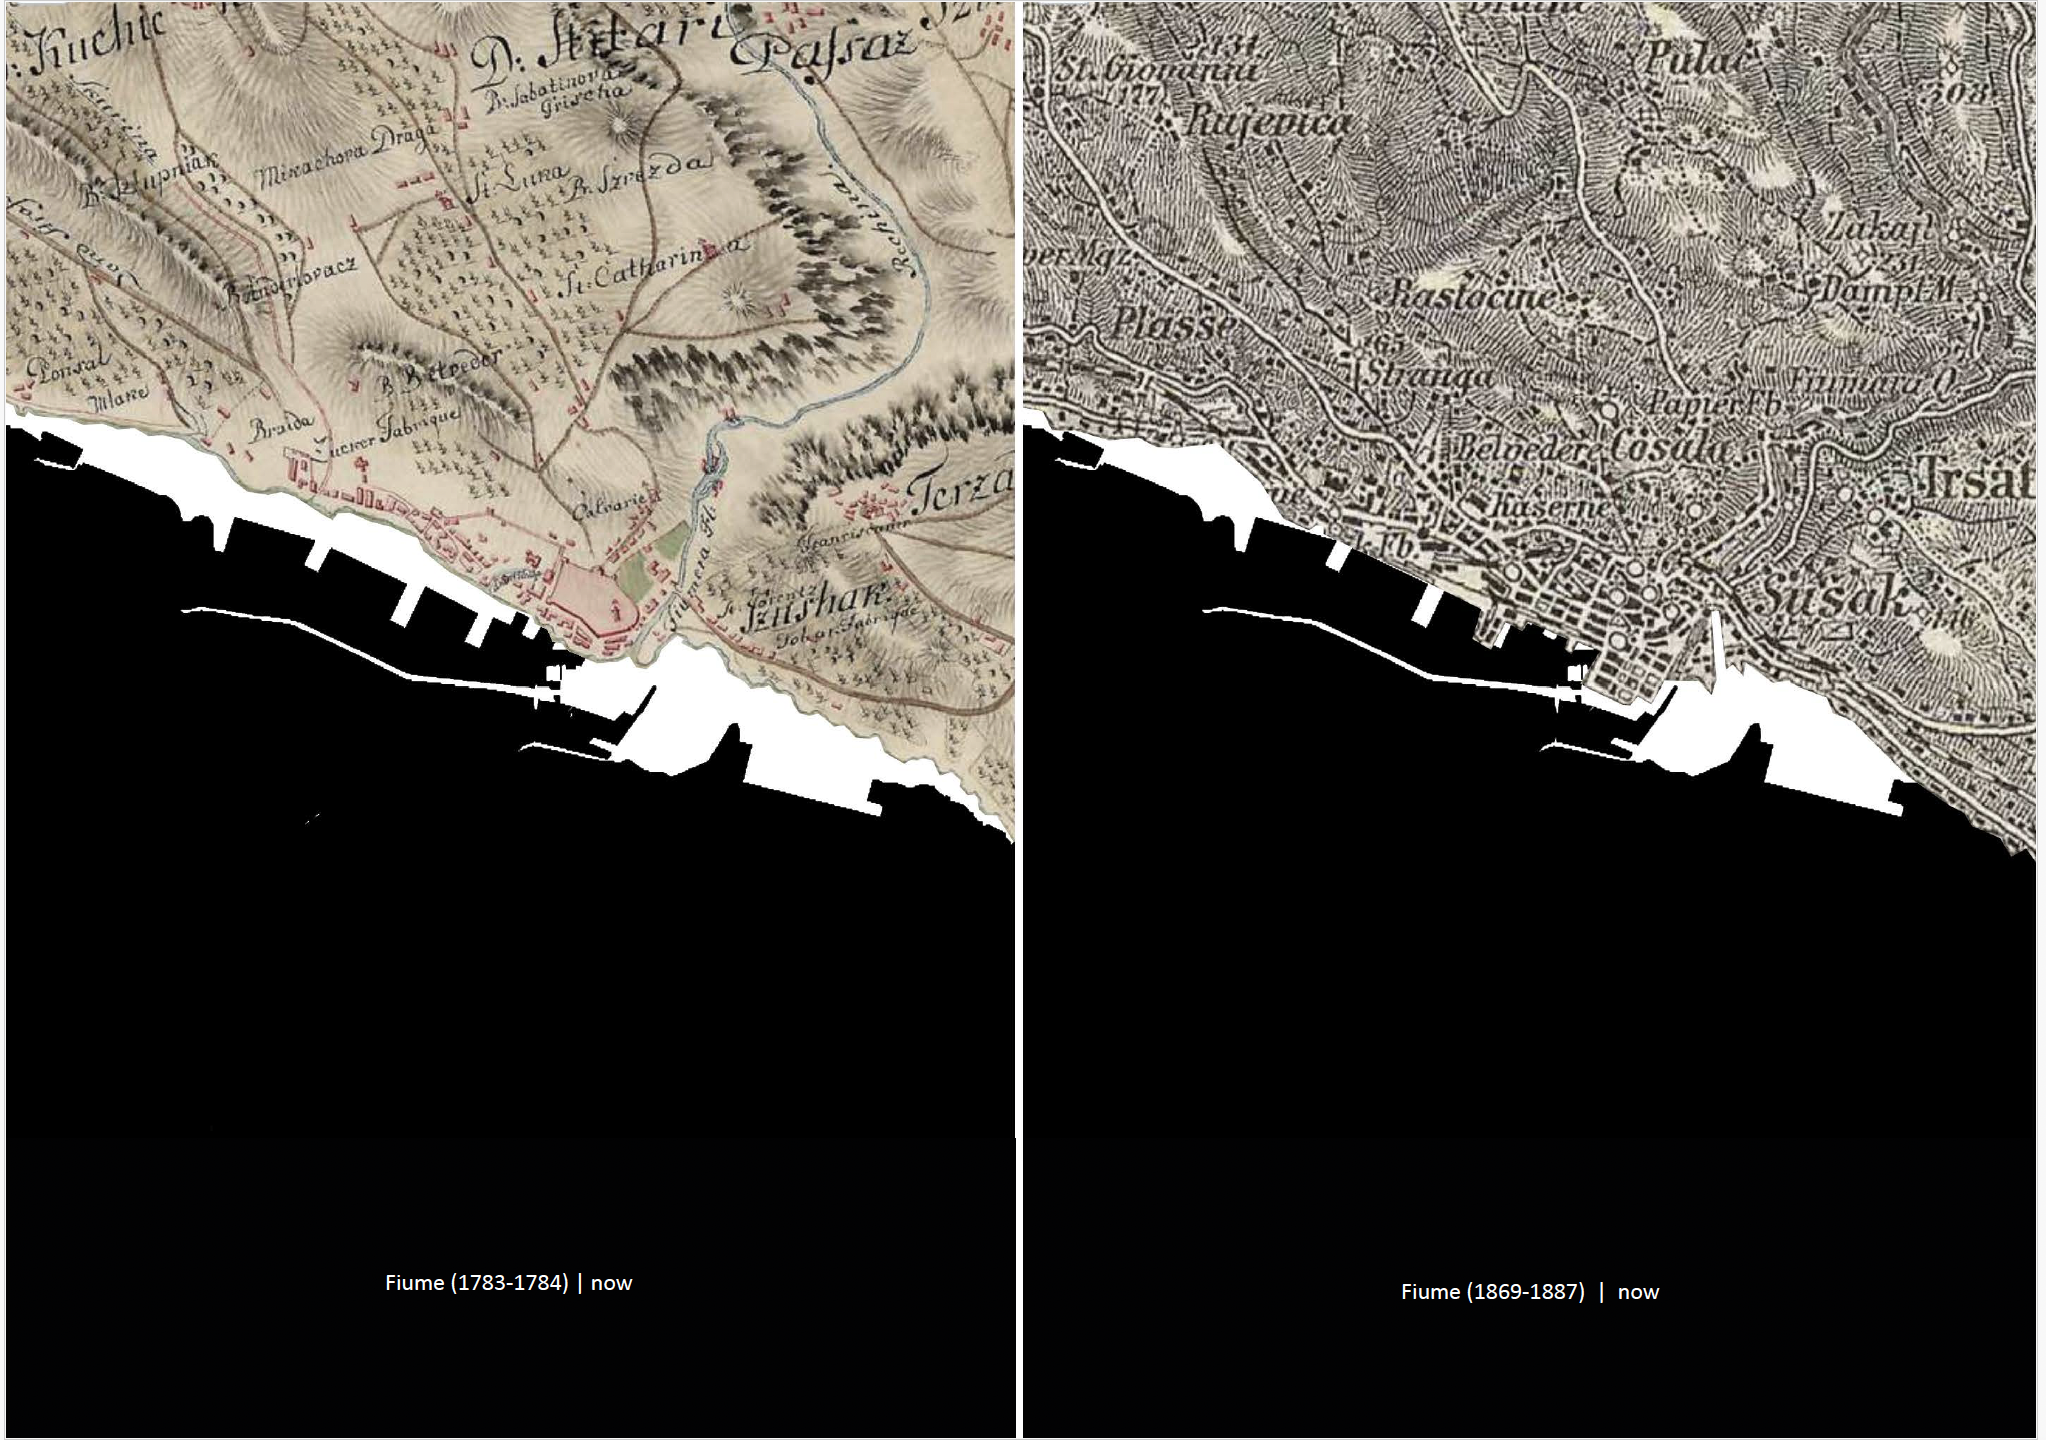 comparison of two historic maps of the harbour of rijeka 